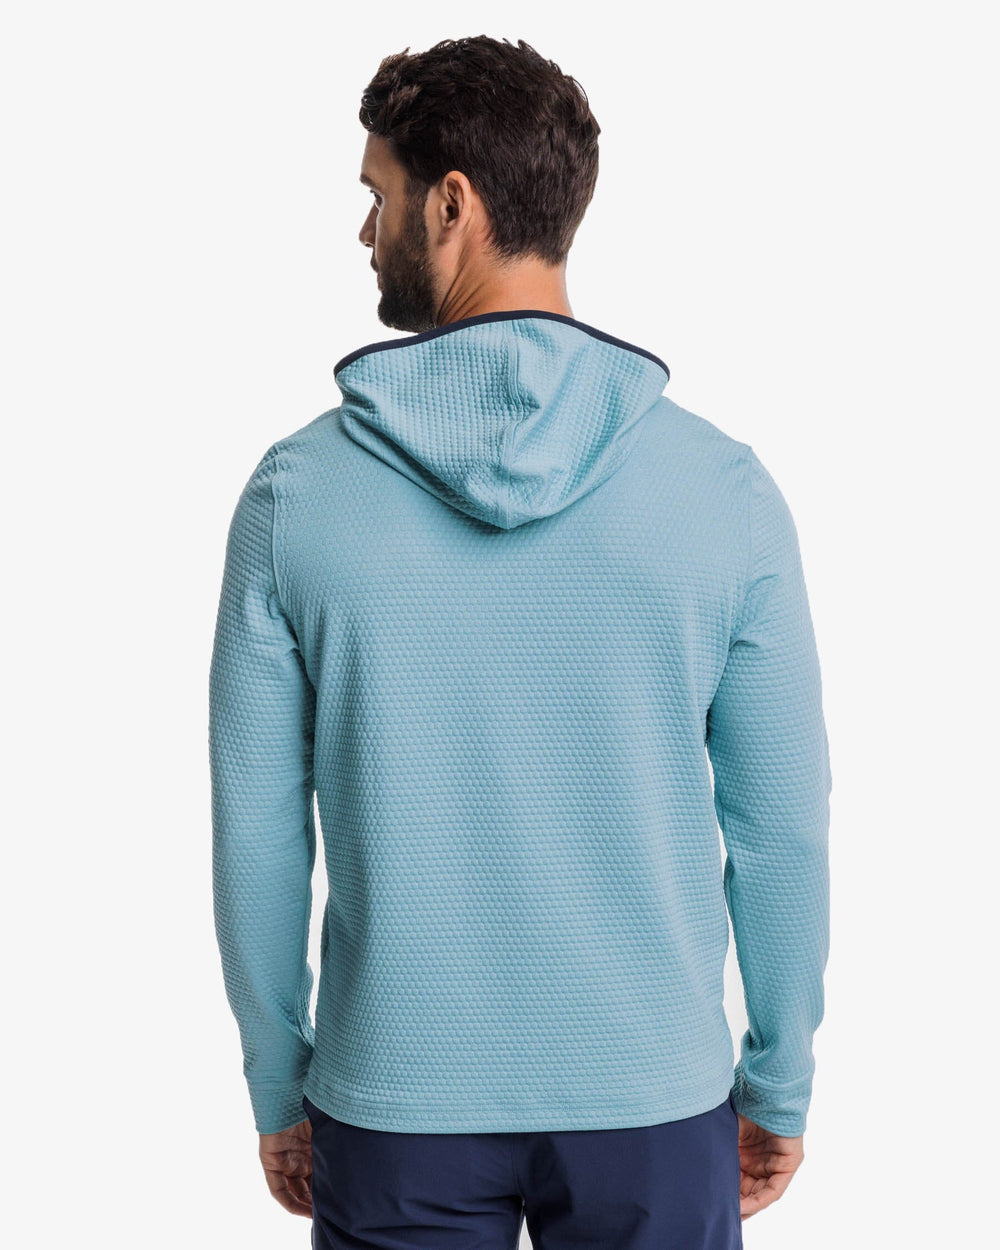 The back view of the Southern Tide Scuttle Heather Performance Quarter Zip Hoodie by Southern Tide - Heather Ocean Teal